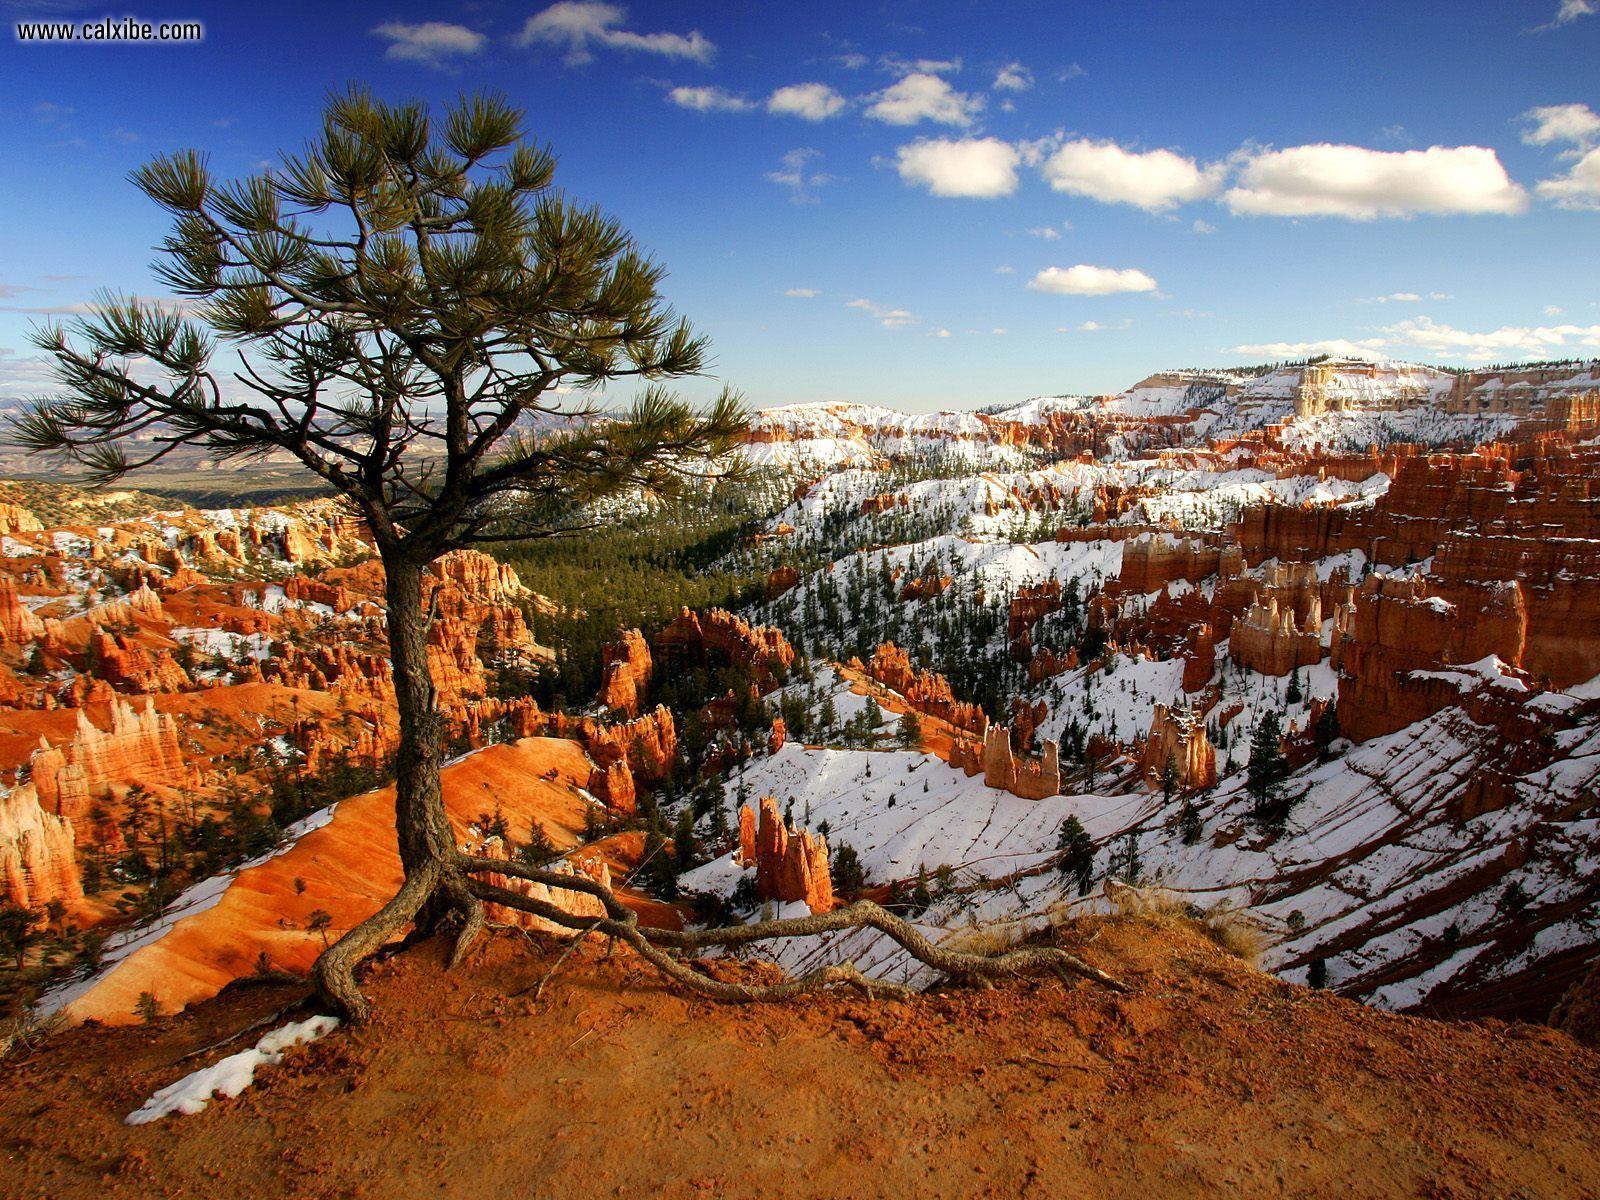 Nature: Aloneonthe Rim Bryce Canyon National Park Utah, picture nr